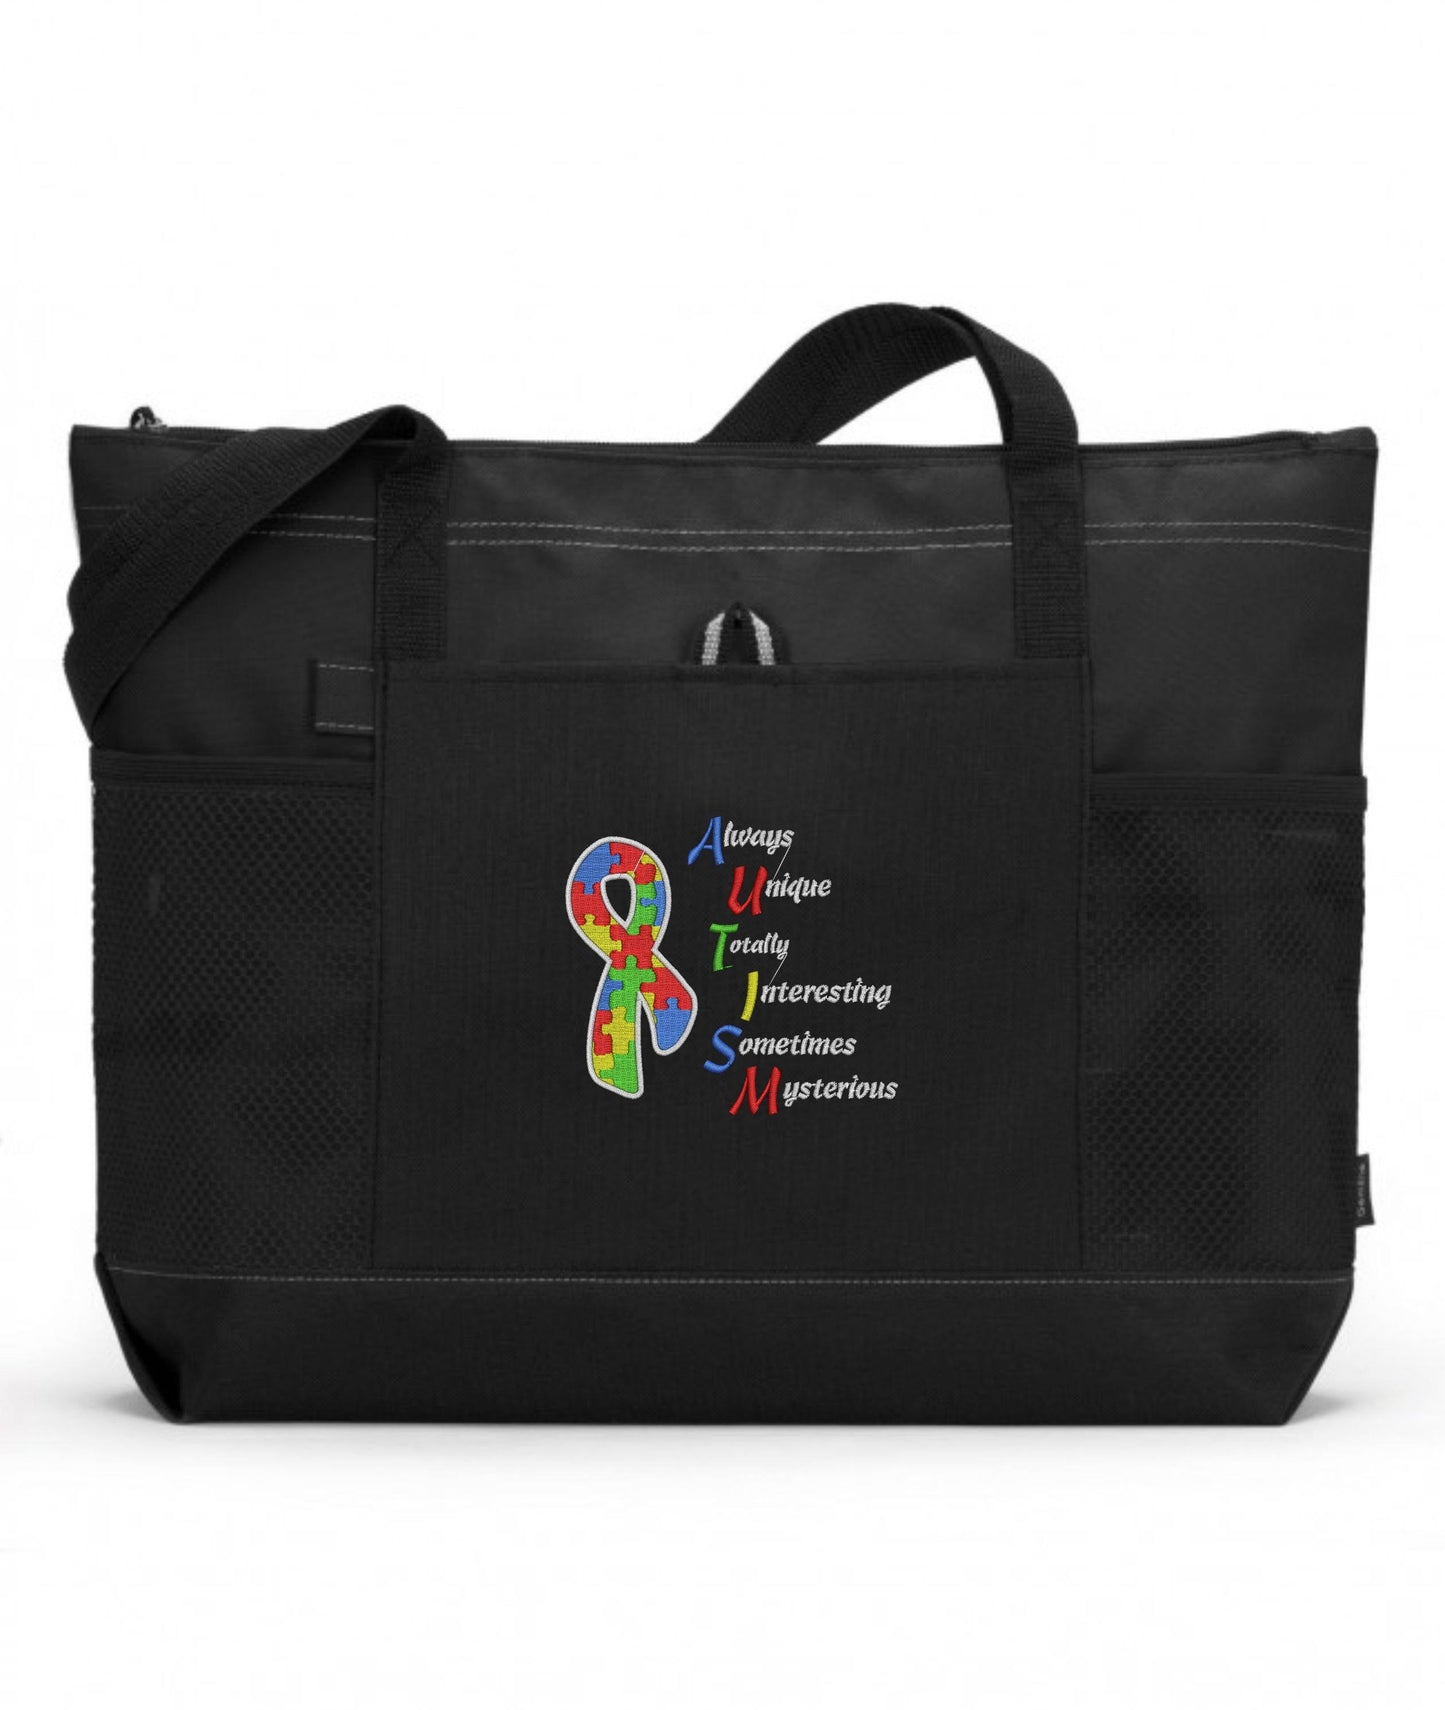 Always Unique Totally Interesting Sometimes Mysterious Embroidered Autism Tote Bag